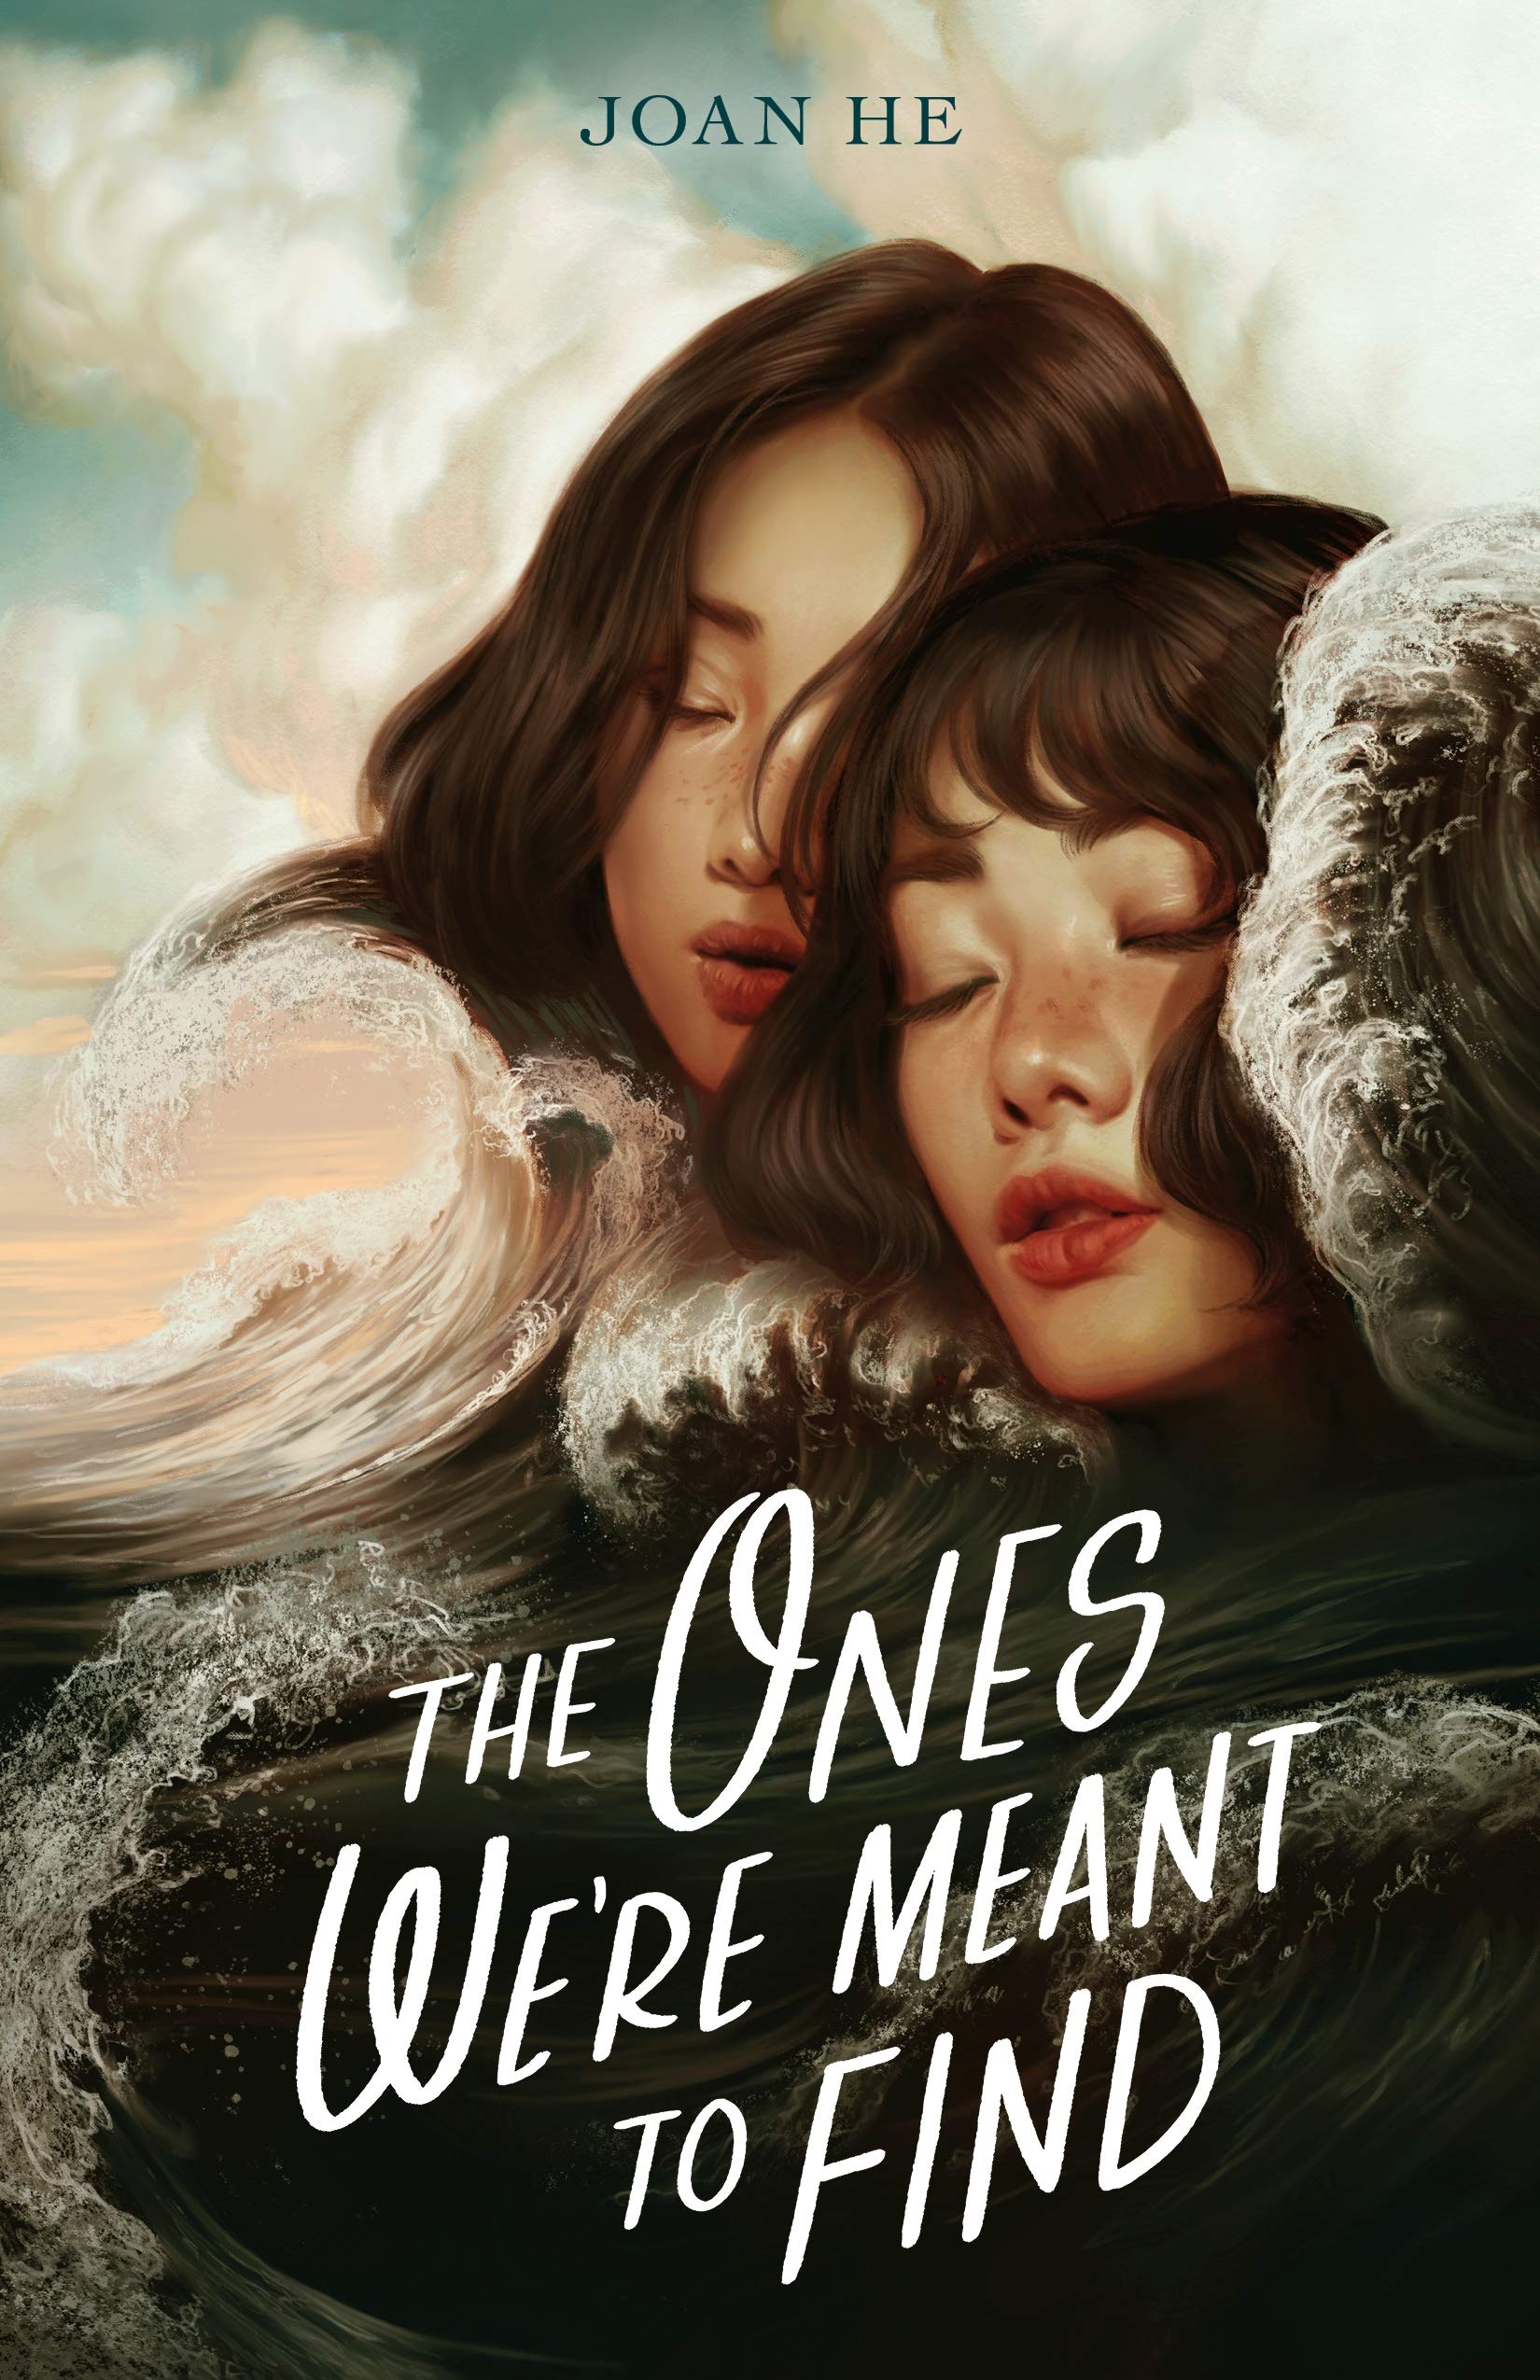 Joan He: Ones We're Meant to Find (2021, Roaring Brook Press)